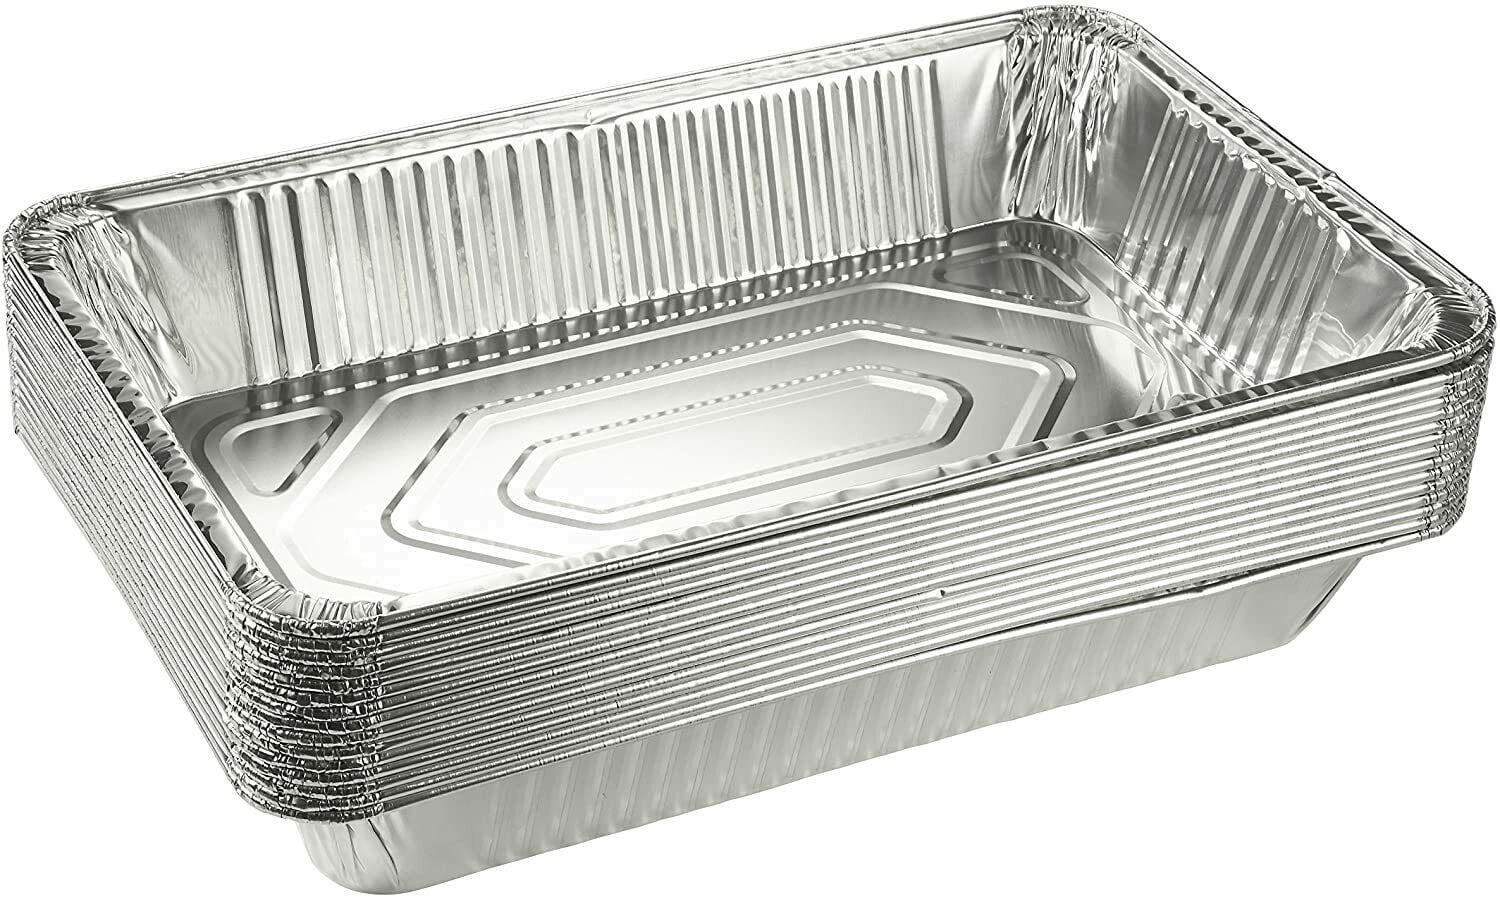 Roasting Meal Cooking Half Size- 12 1/2 x 10 1/4 x 2 1/2 inch Broiling Disposable Steam Table Grill Drip Deep Trays 10 Pack 9 x 13 Aluminum Foil Pans Baking Heating Buffet Trays Tin Pans